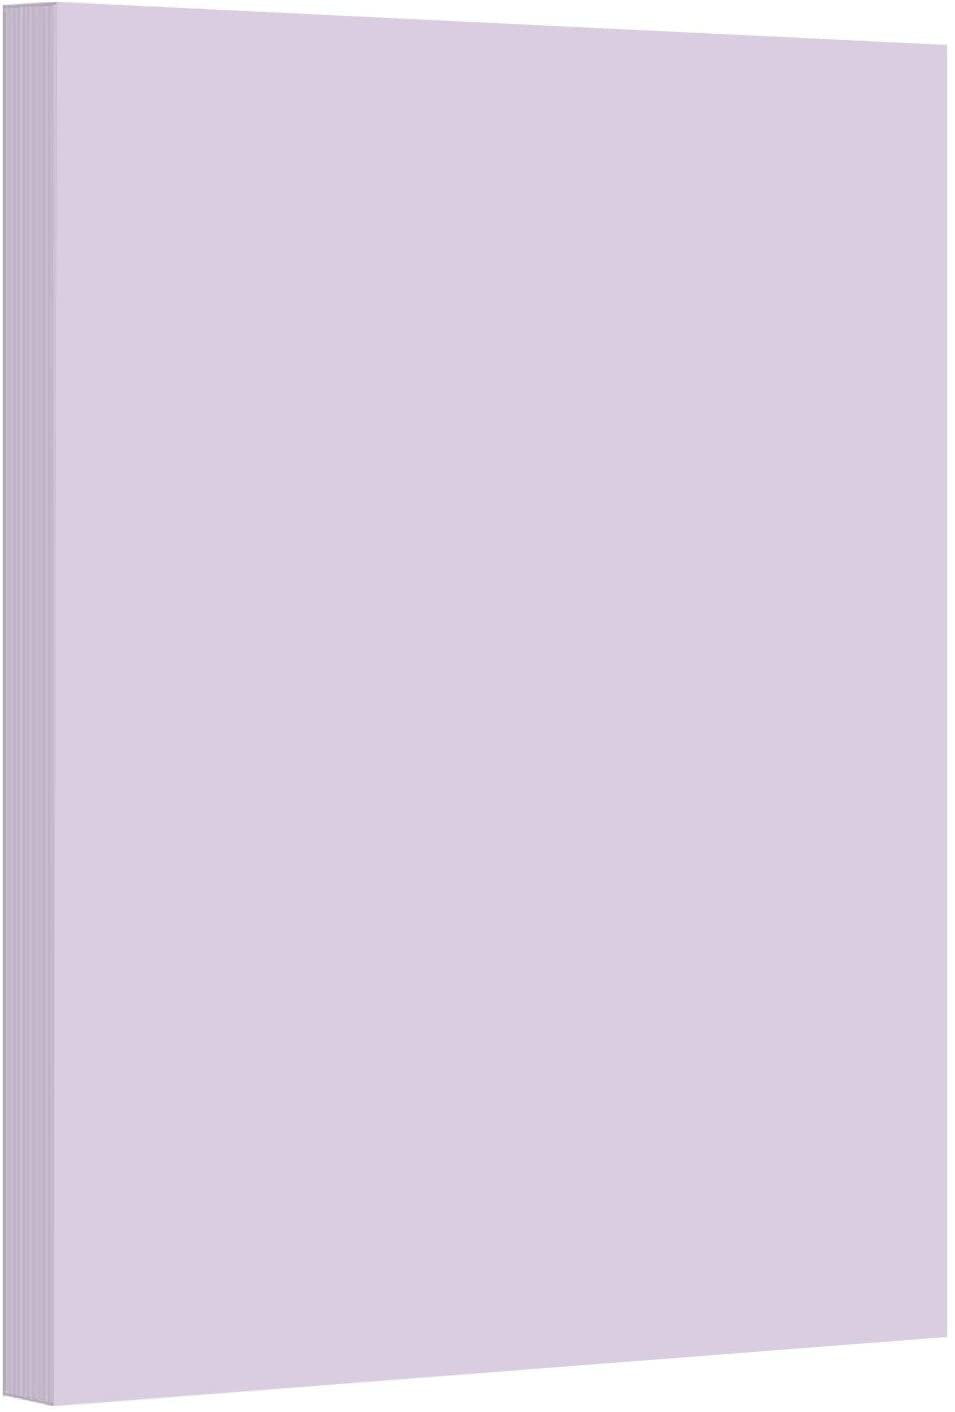 Ivory Pastel Color Card Stock Paper, 67lb Cover Medium Weight Cardstock,  for Arts & Crafts, Coloring, Announcements, Stationary Printing at School